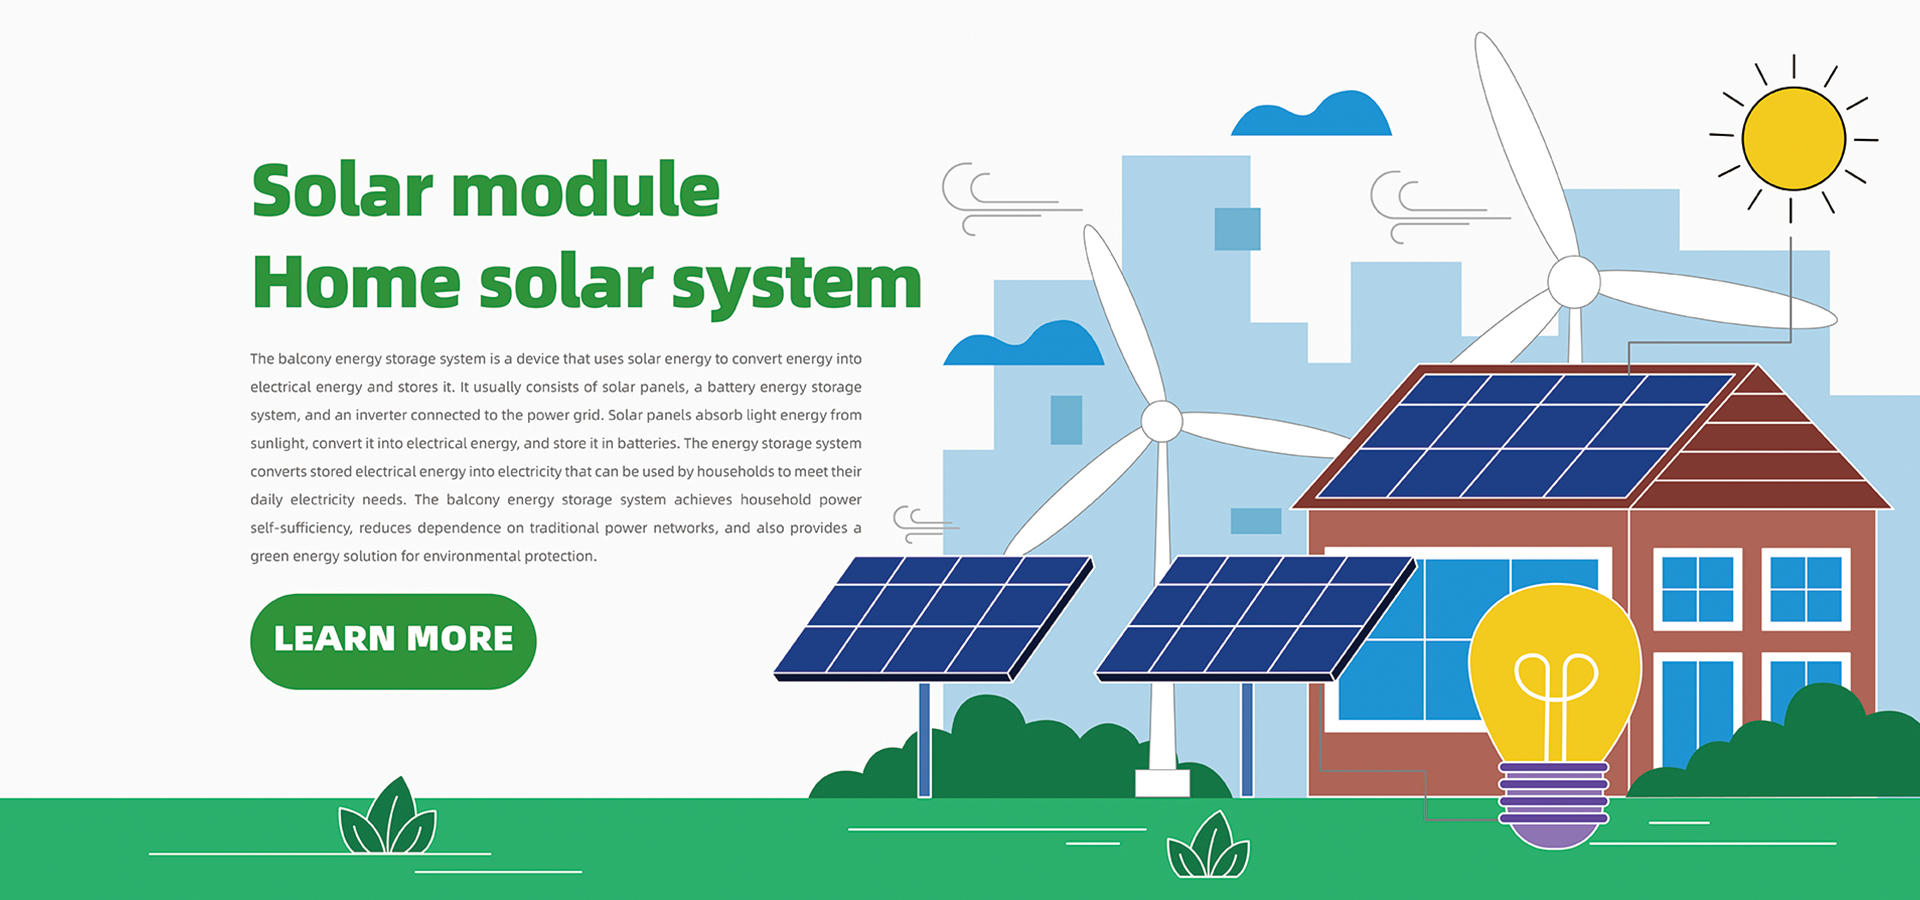 OMMO Home solar system Product application scheme introduction picture